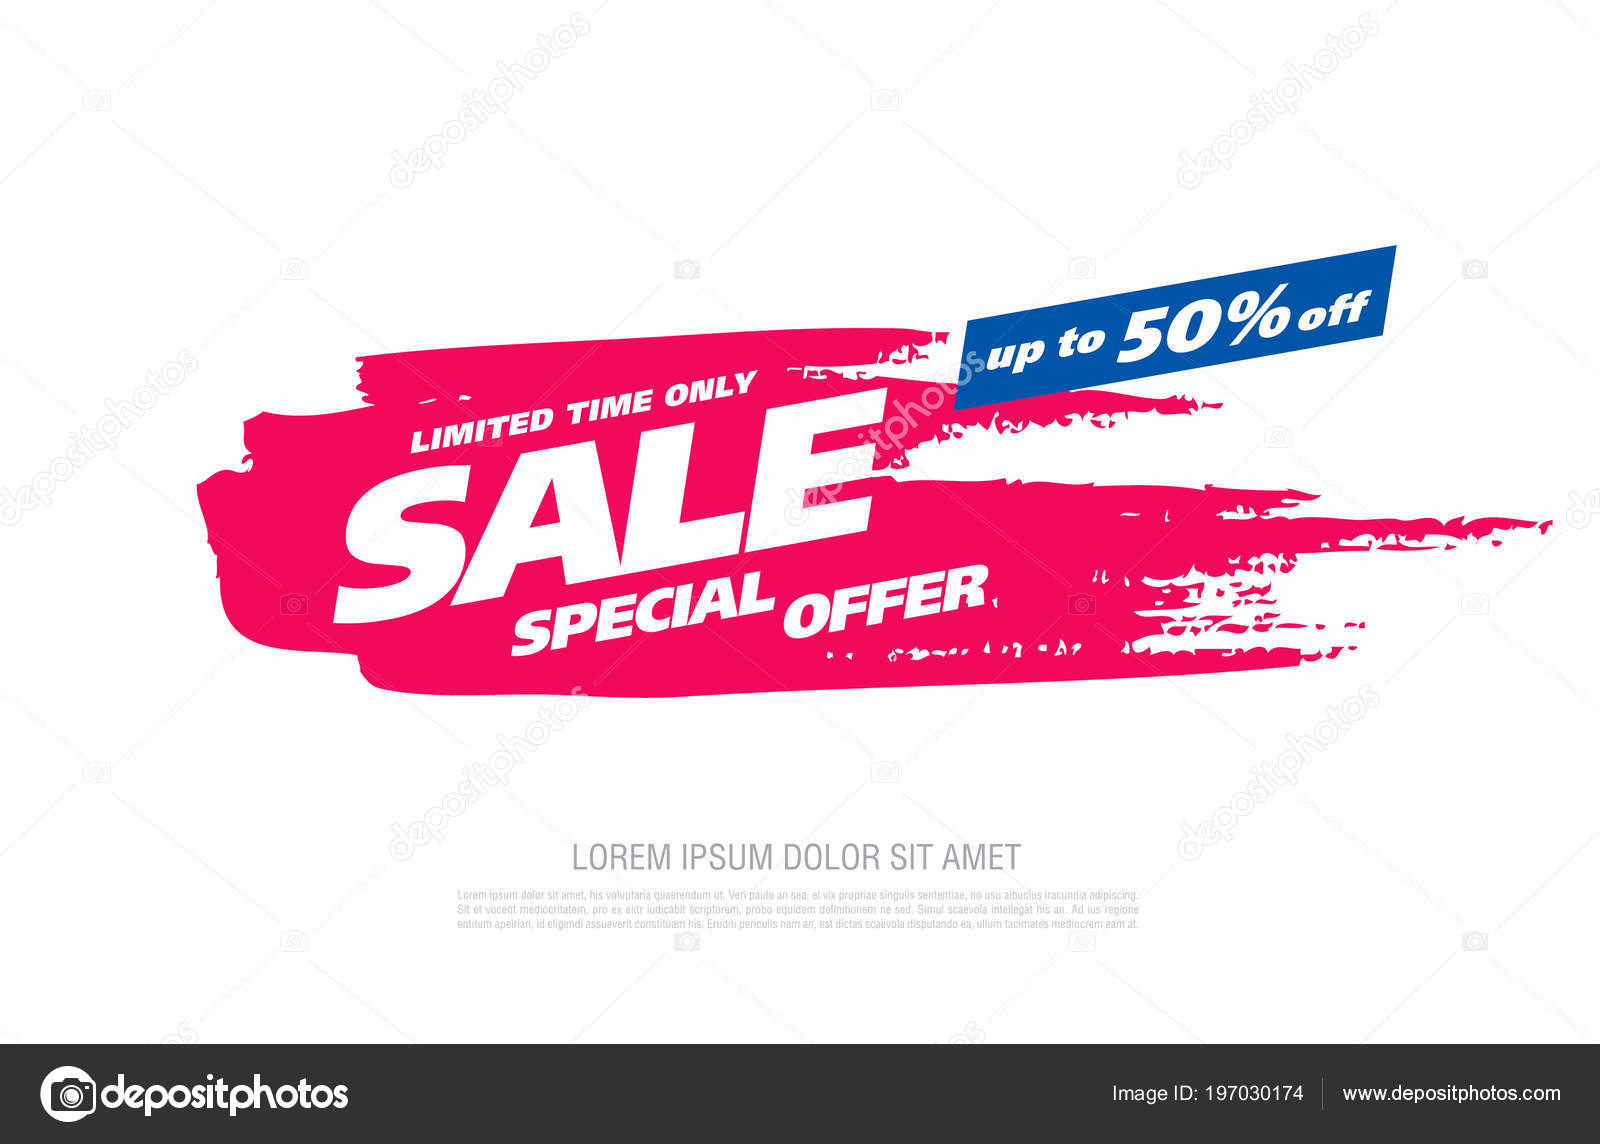 Limited time only one day special offer discount Vector Image